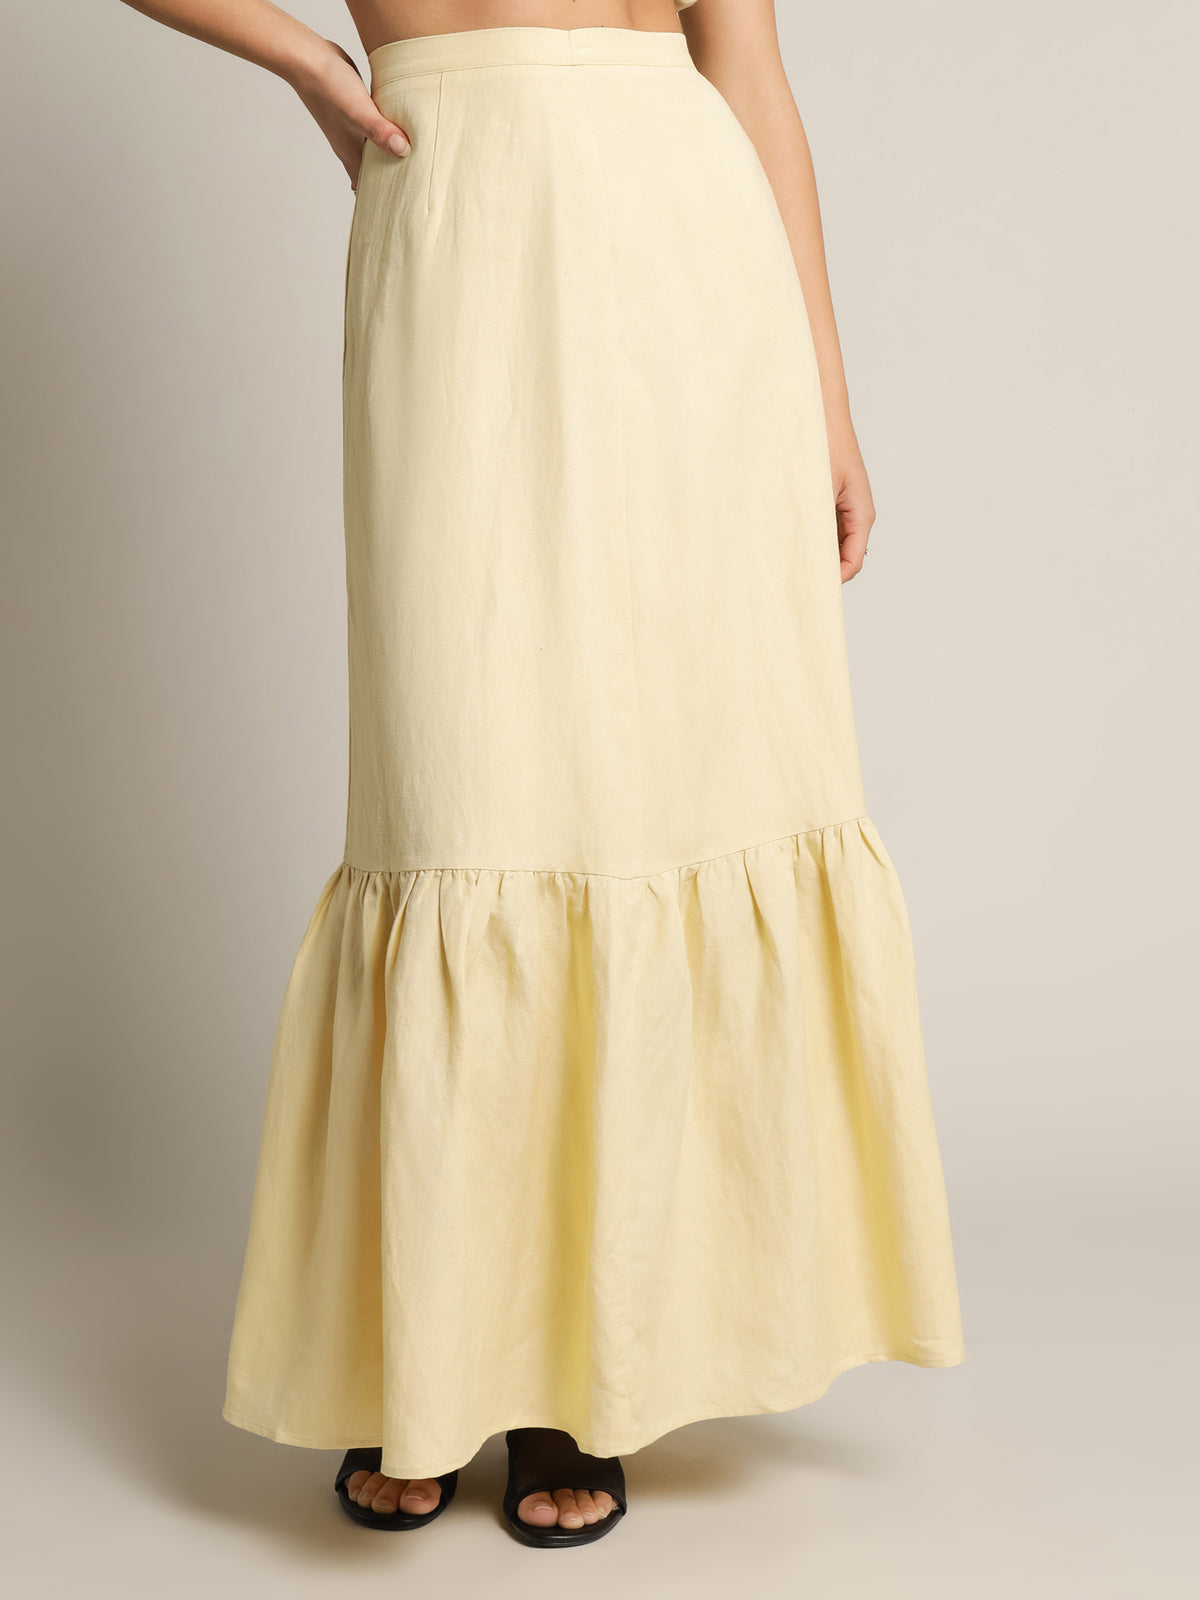 Lucia Maxi Skirt in Limone